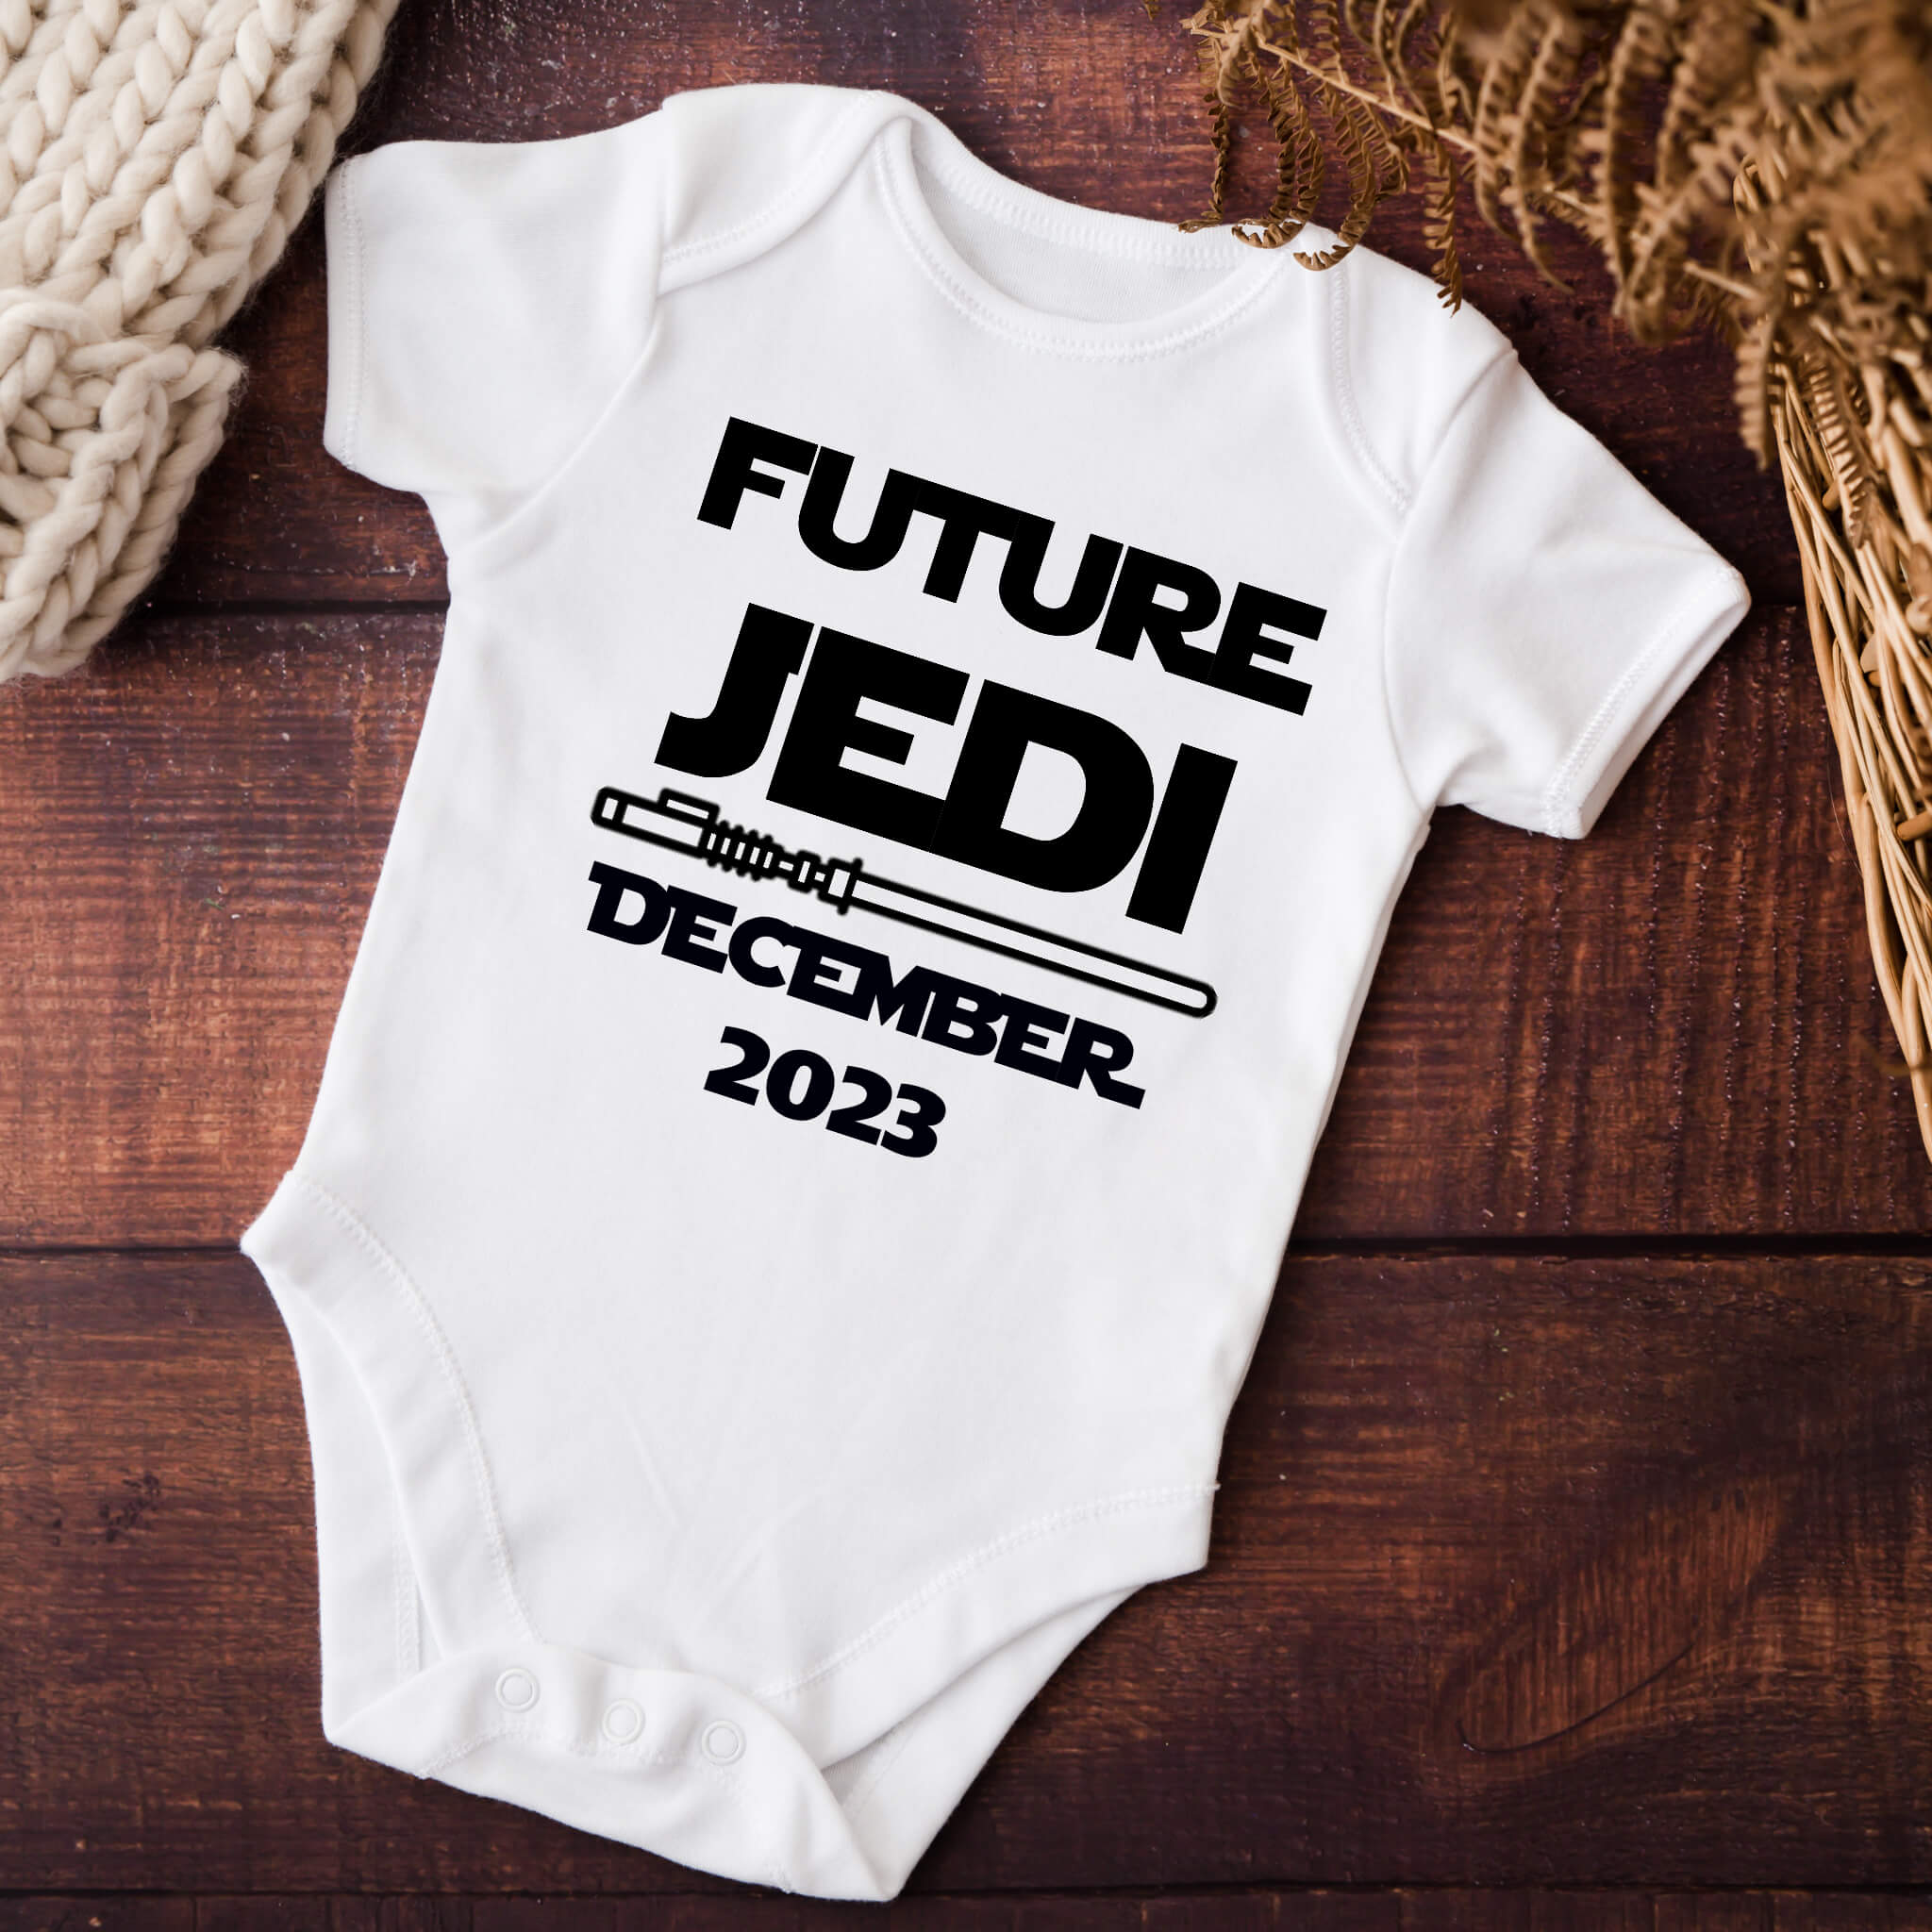 Personalized Pregnancy Announcement, Future Jedi Coming, Dad, Grandma, Grandpa, Aunt, Uncle To Be, Customized Baby Announcement Onesie, Social Media Announcement, Gift Box Baby Announcement, Animated Movie Characters Pregnancy Announcement